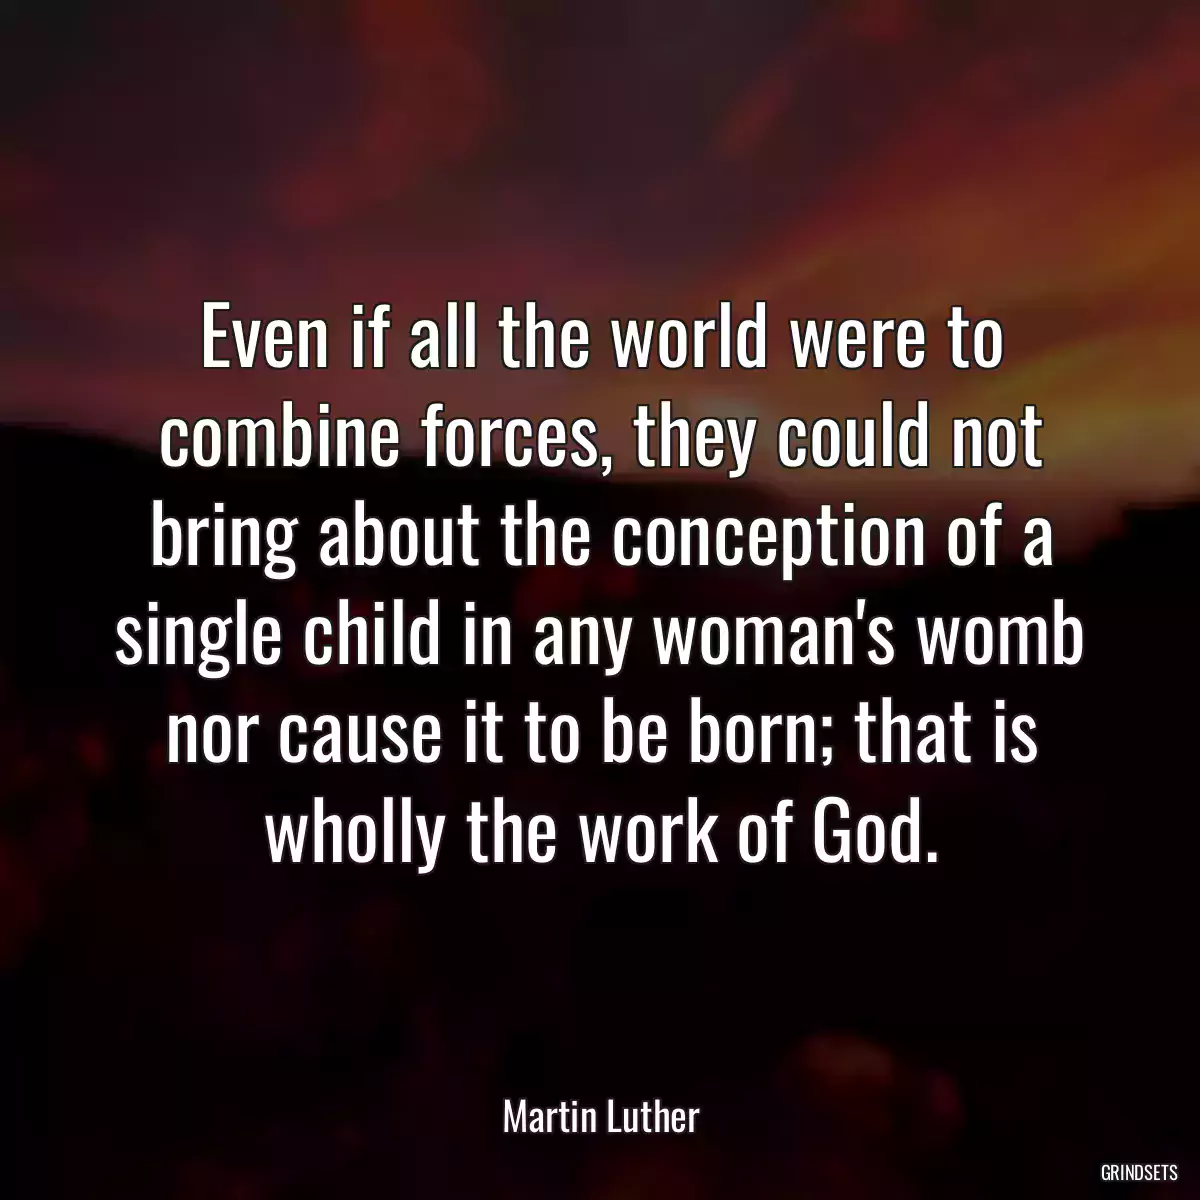 Even if all the world were to combine forces, they could not bring about the conception of a single child in any woman\'s womb nor cause it to be born; that is wholly the work of God.